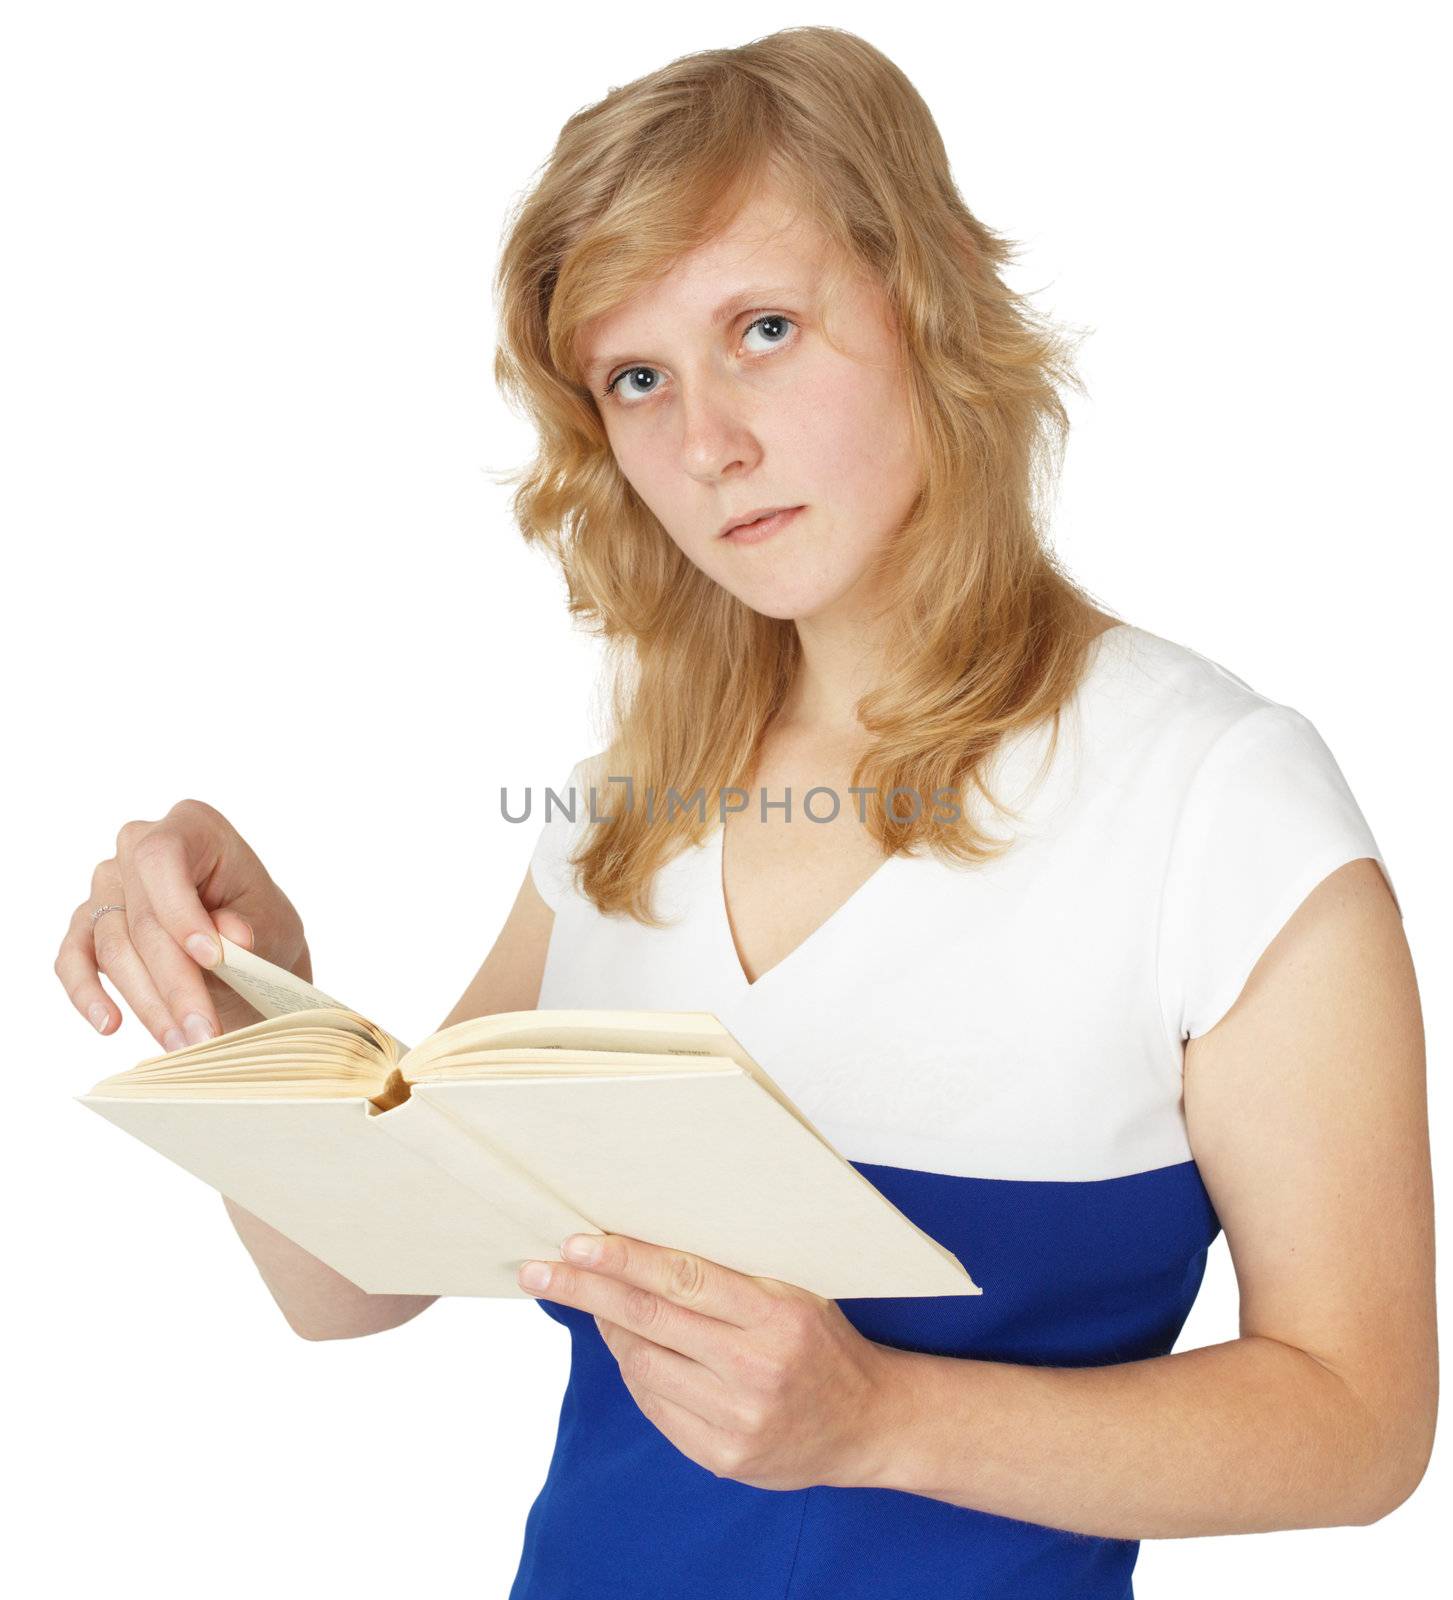 A girl reads a book isolated on a white background